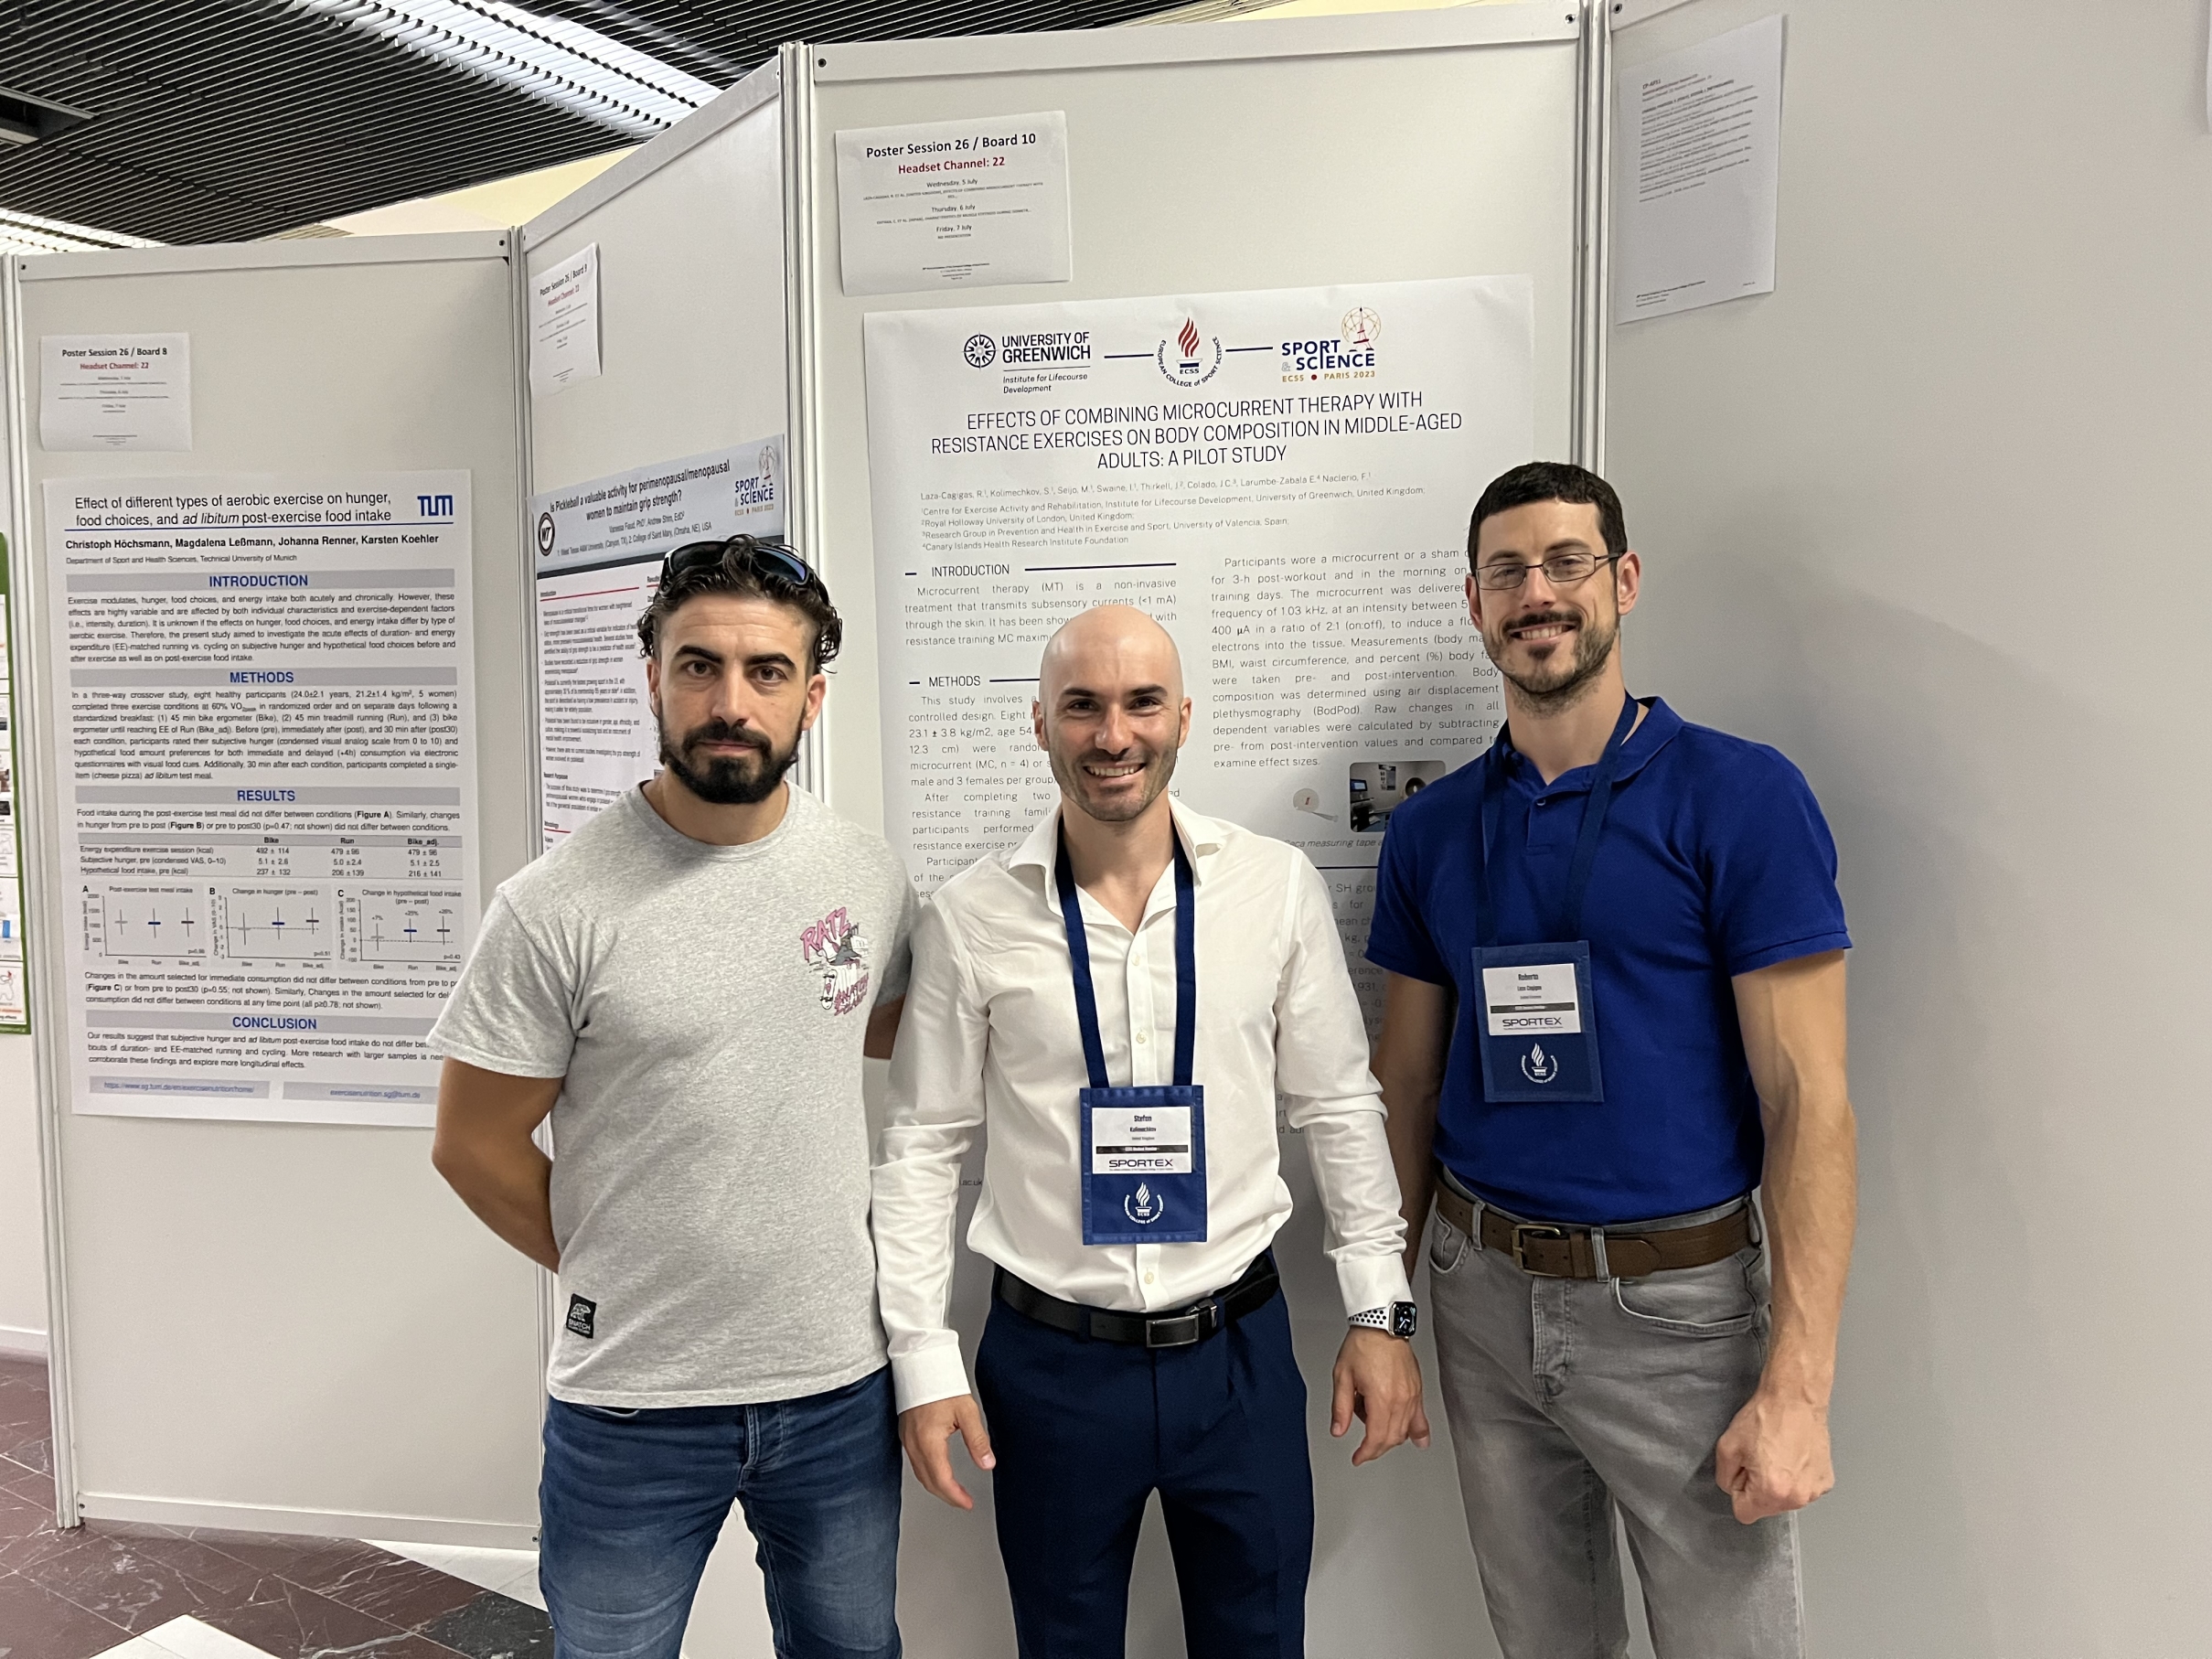 Dr Stefan Kolimechkov and colleagues from the University of Greenwich at the ECSS Paris 2023